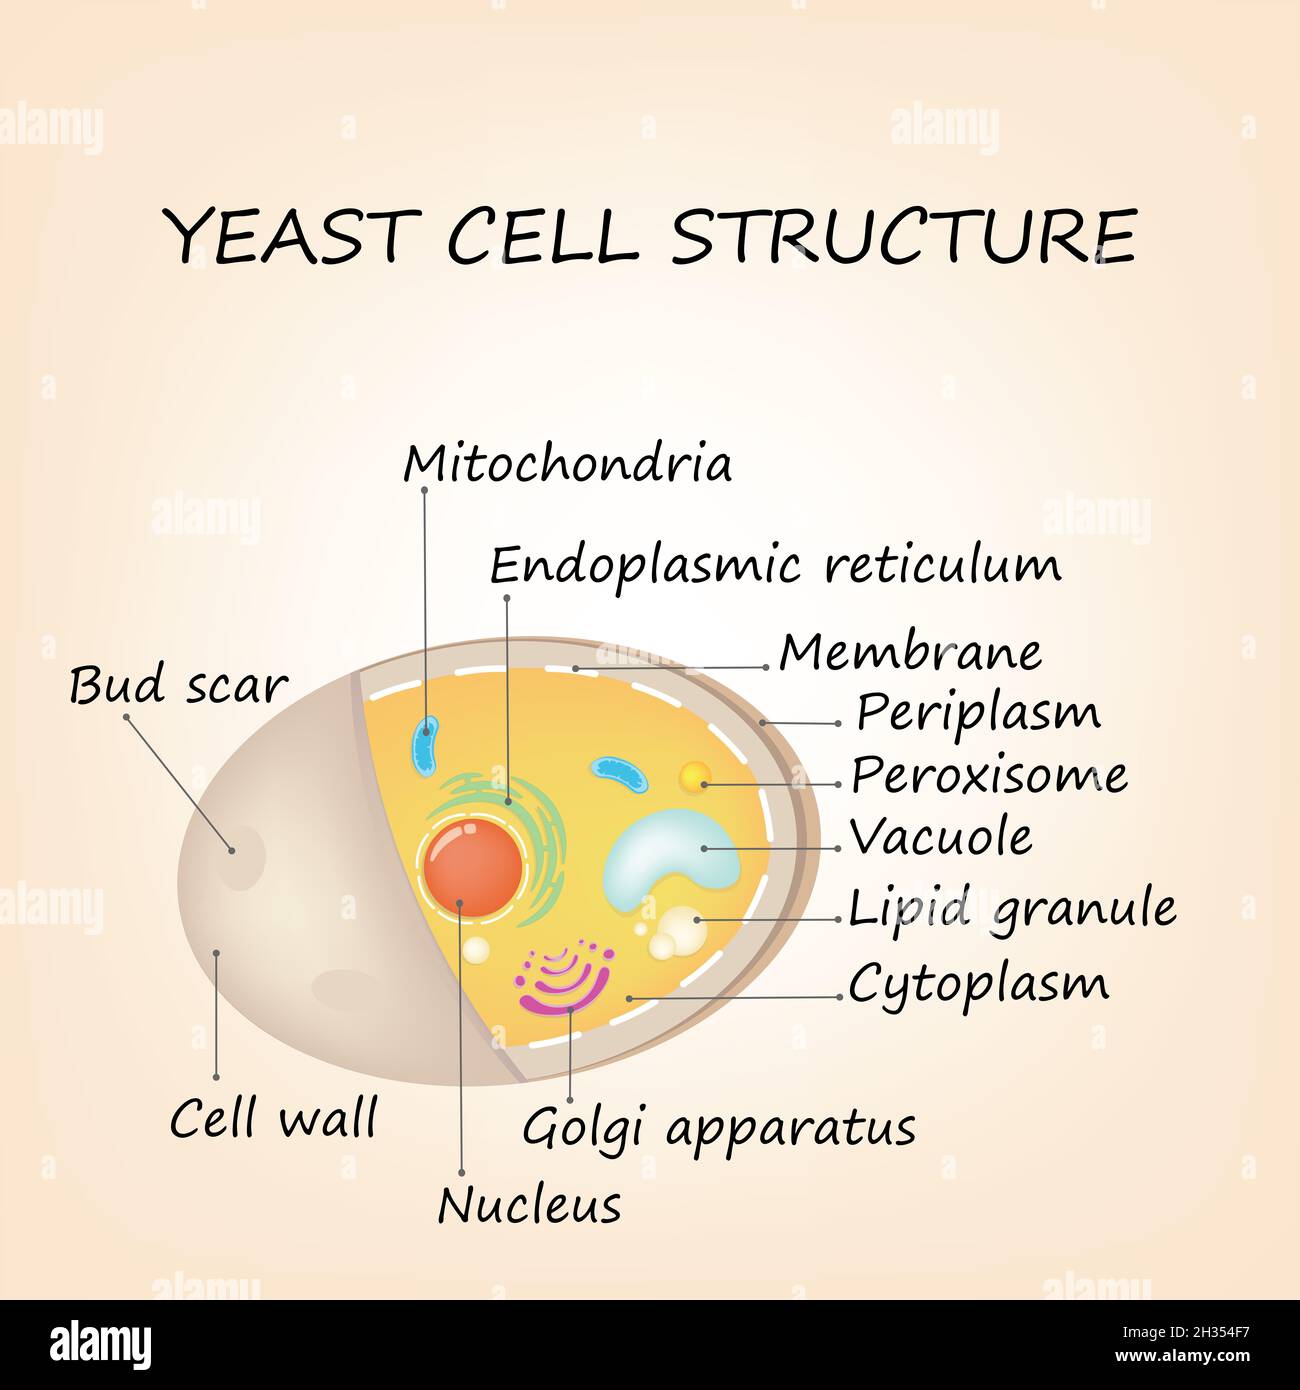 Yeast cell structure. Educational diagram colorful illustration Stock Photo